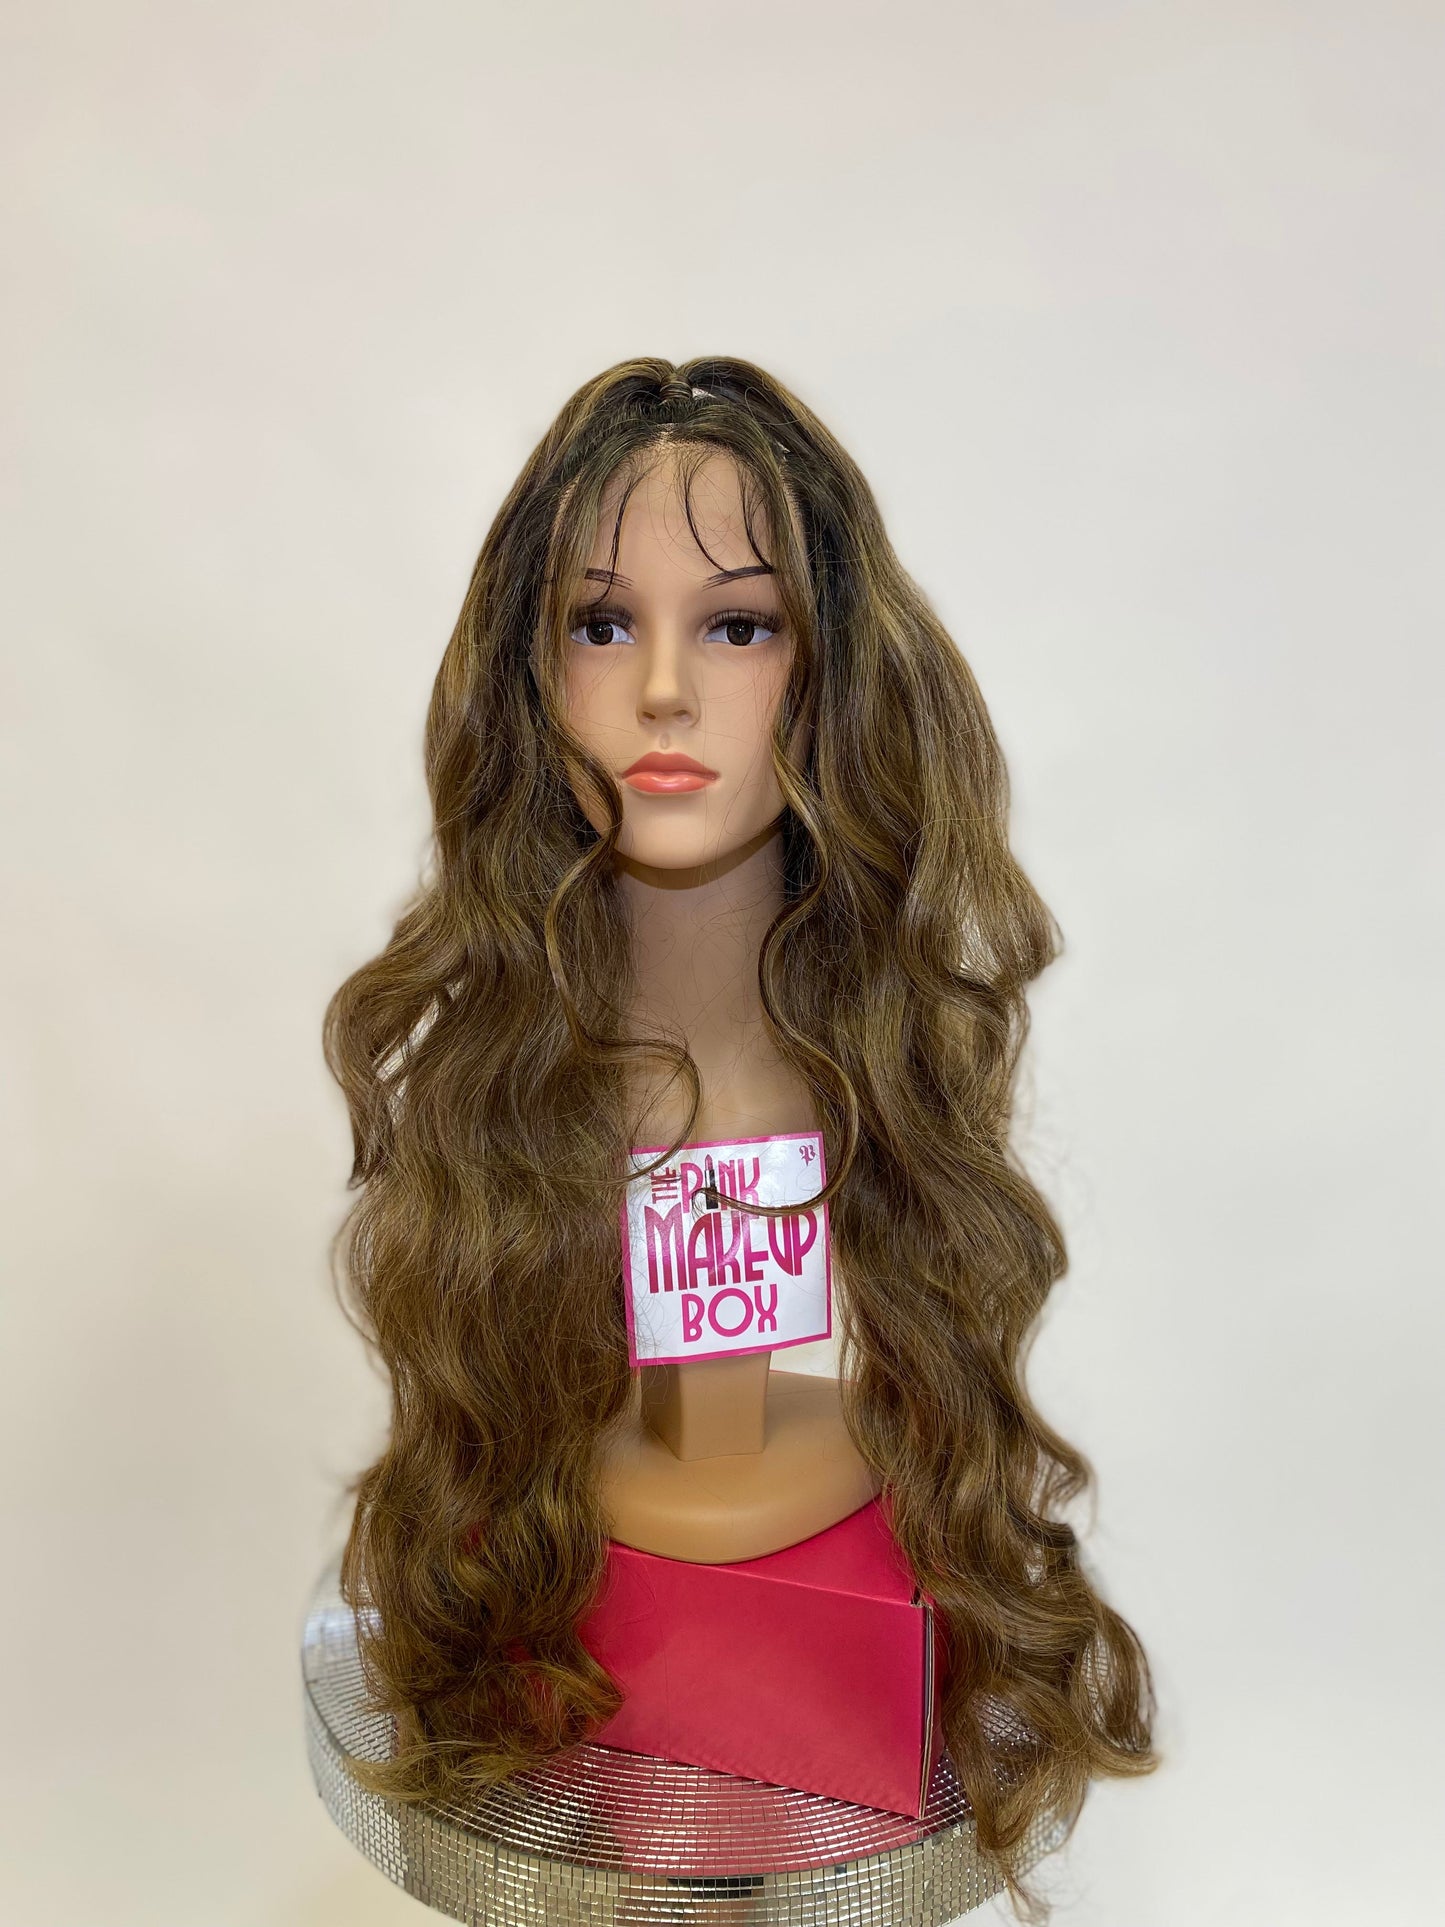 338 Ariana - 13x2 & 360 Top Pony Lace Front Wig - 613/27 - DaizyKat Cosmetics 338 Ariana - 13x2 & 360 Top Pony Lace Front Wig - 613/27 DaizyKat Cosmetics WIGS